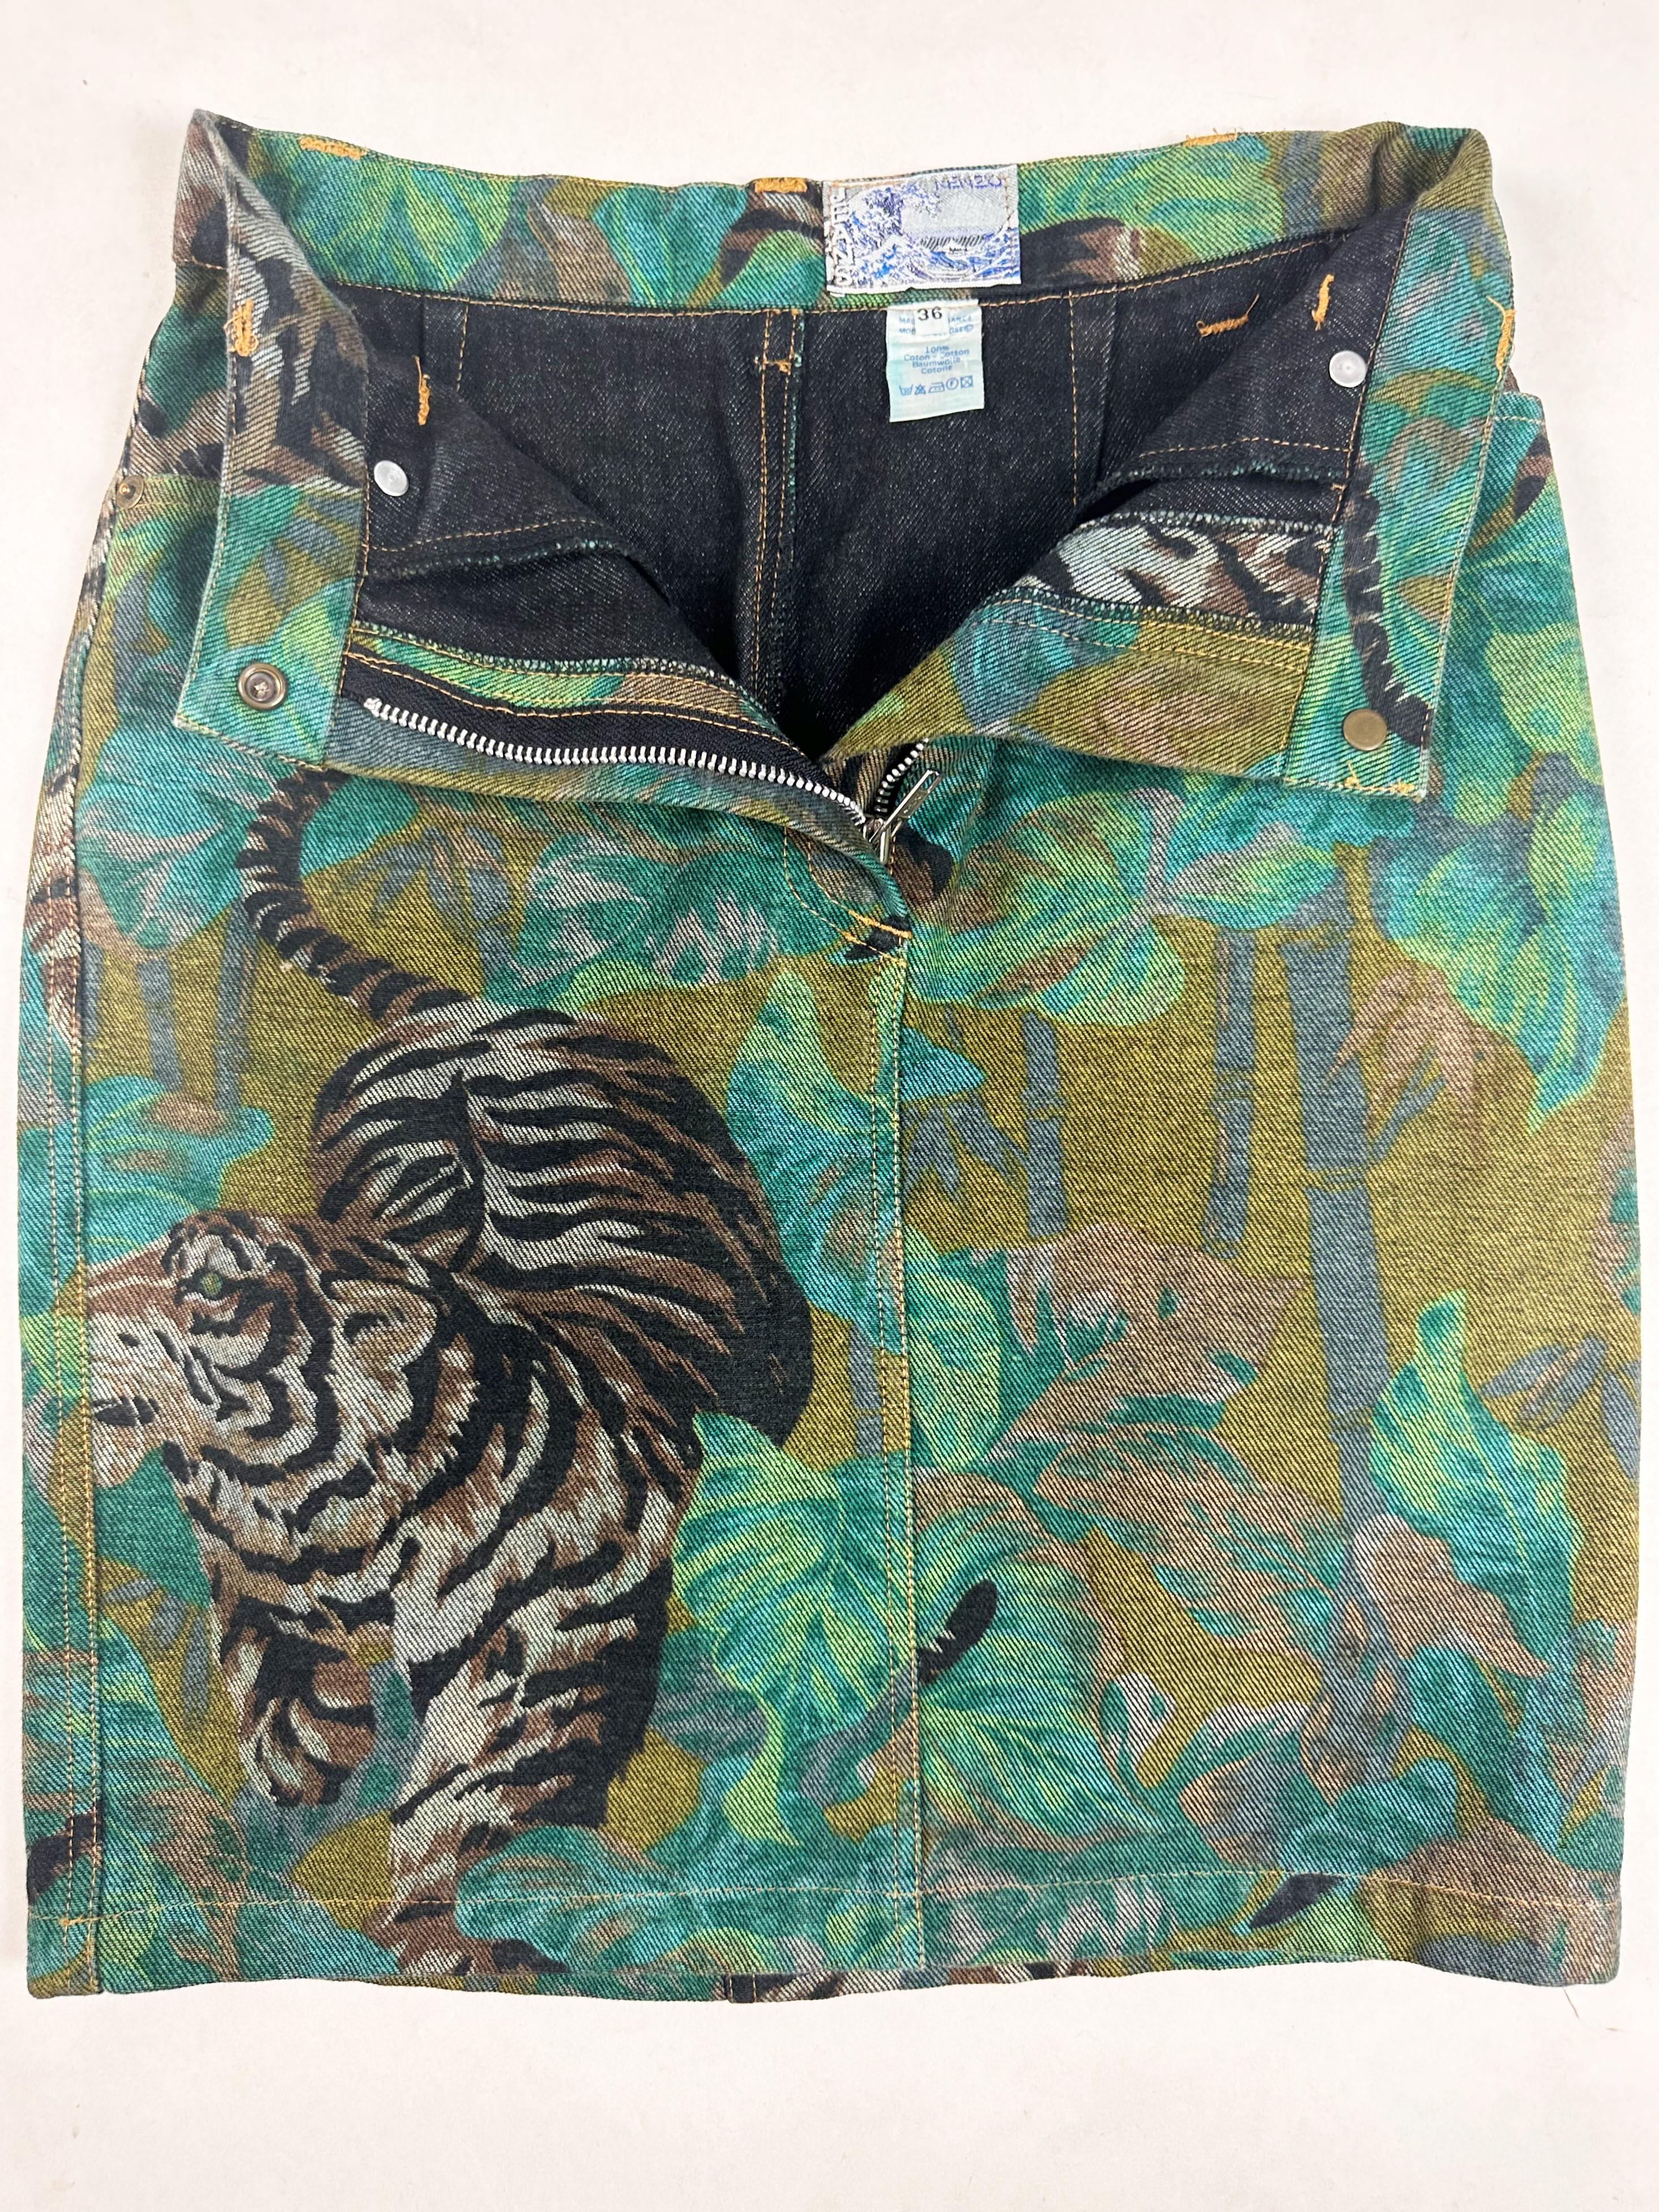 Jacket and Skirt by Kenzo Takada, Jungle & Tiger Print on Denim - French C. 1990 For Sale 12